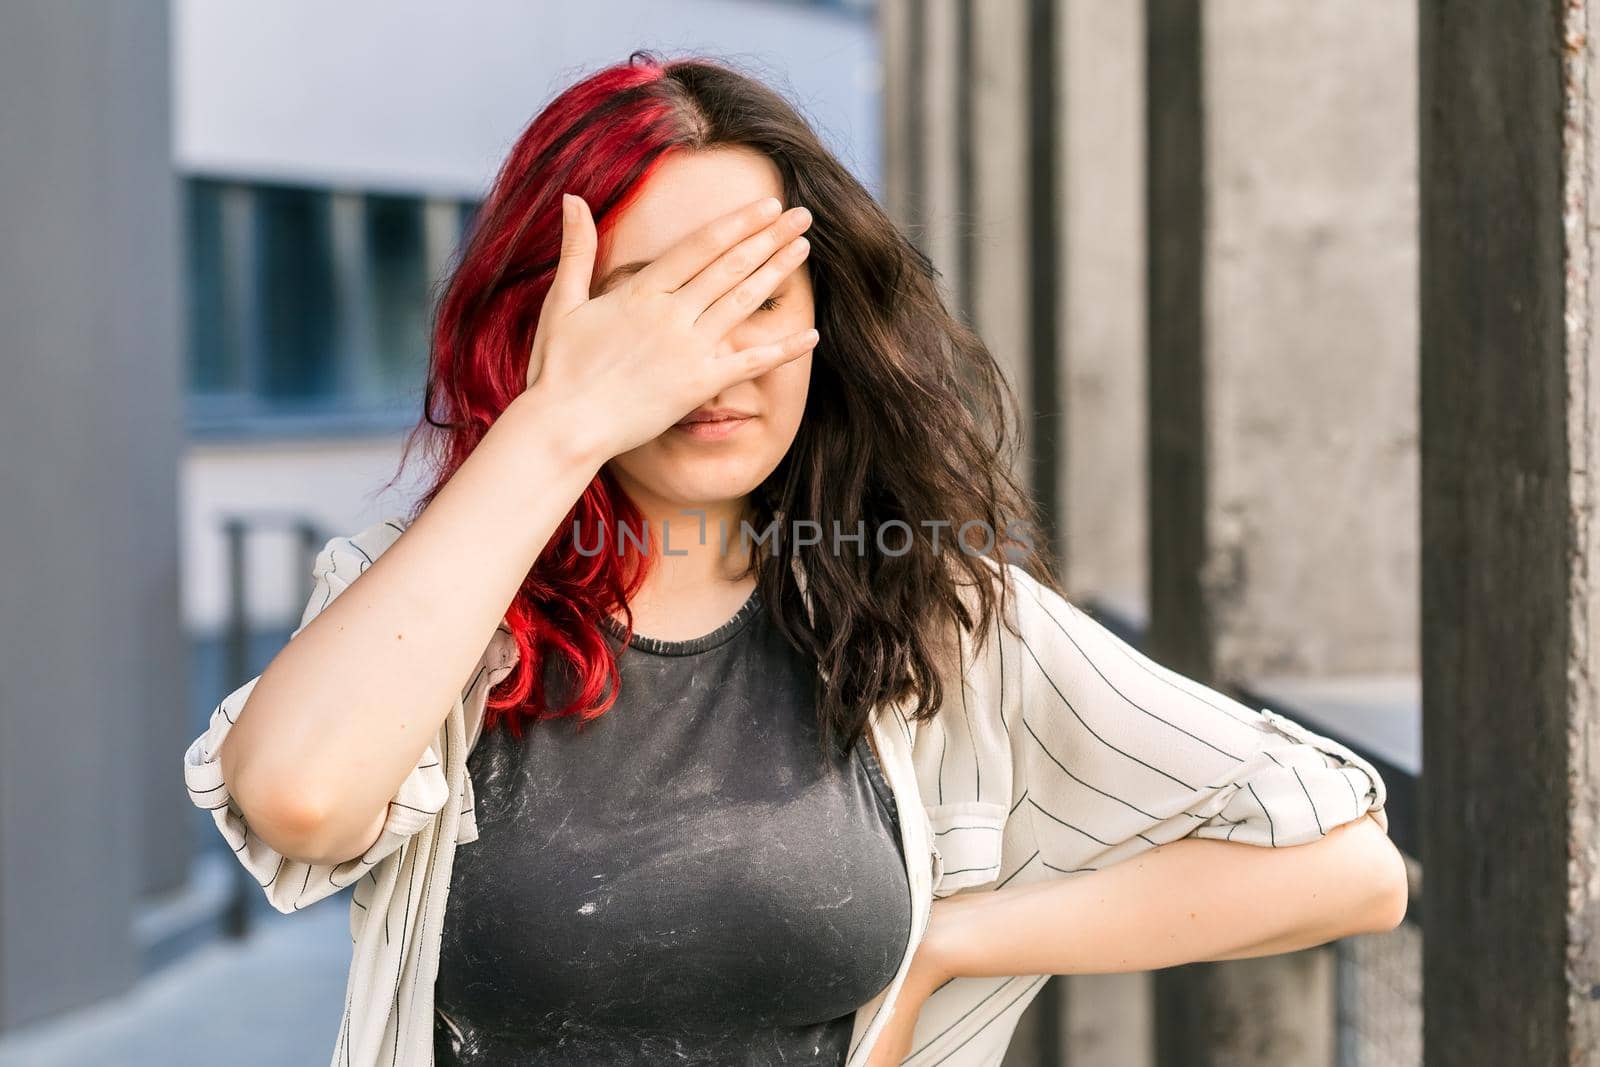 Stylish woman with red and black hair hiding eyes under hand while feeling ashamed or disappointed. Face palm gesture. Human facial expressions and emotions